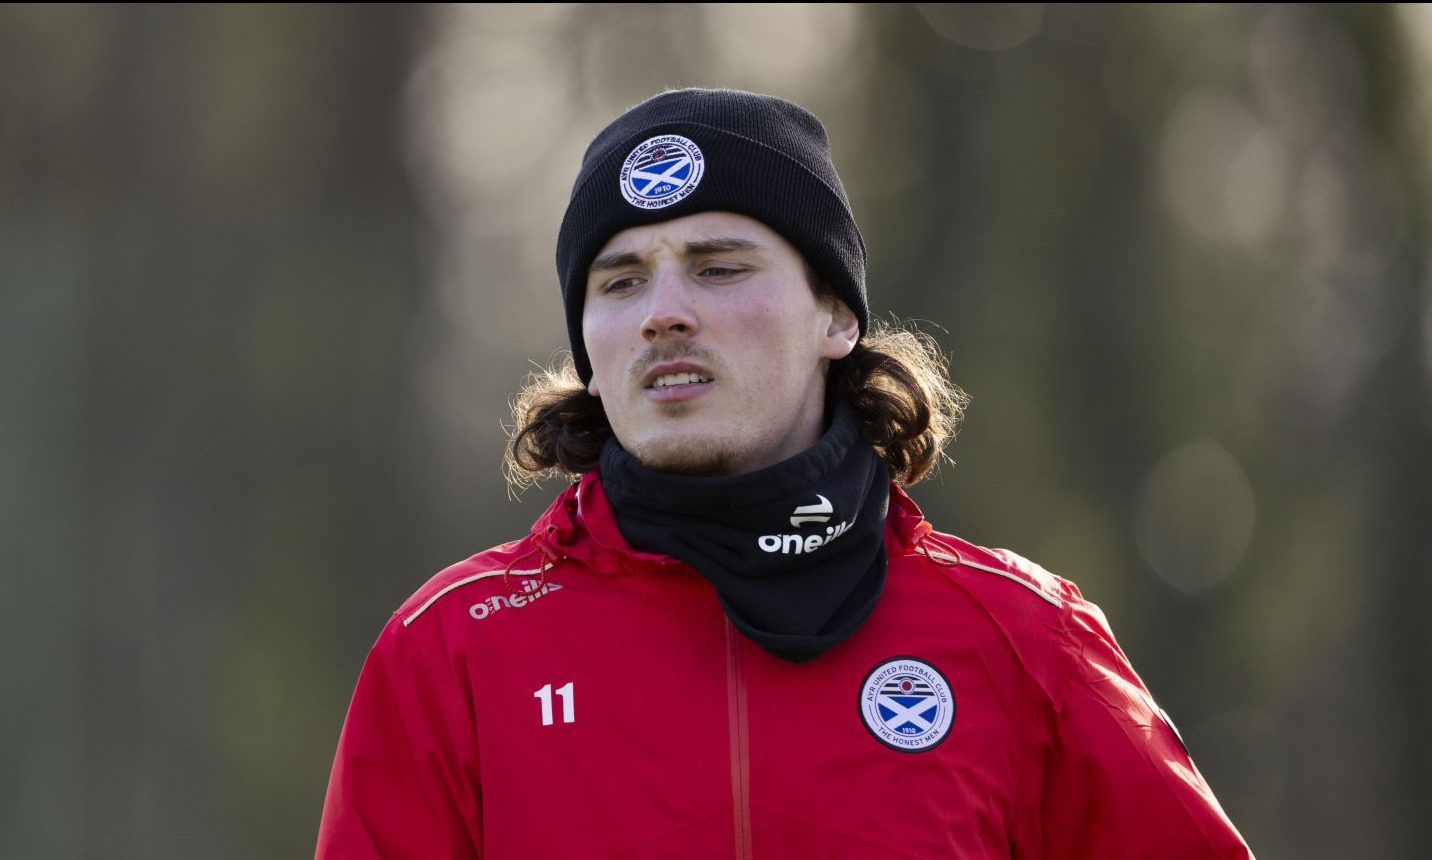 Logan Chalmers in training with Ayr